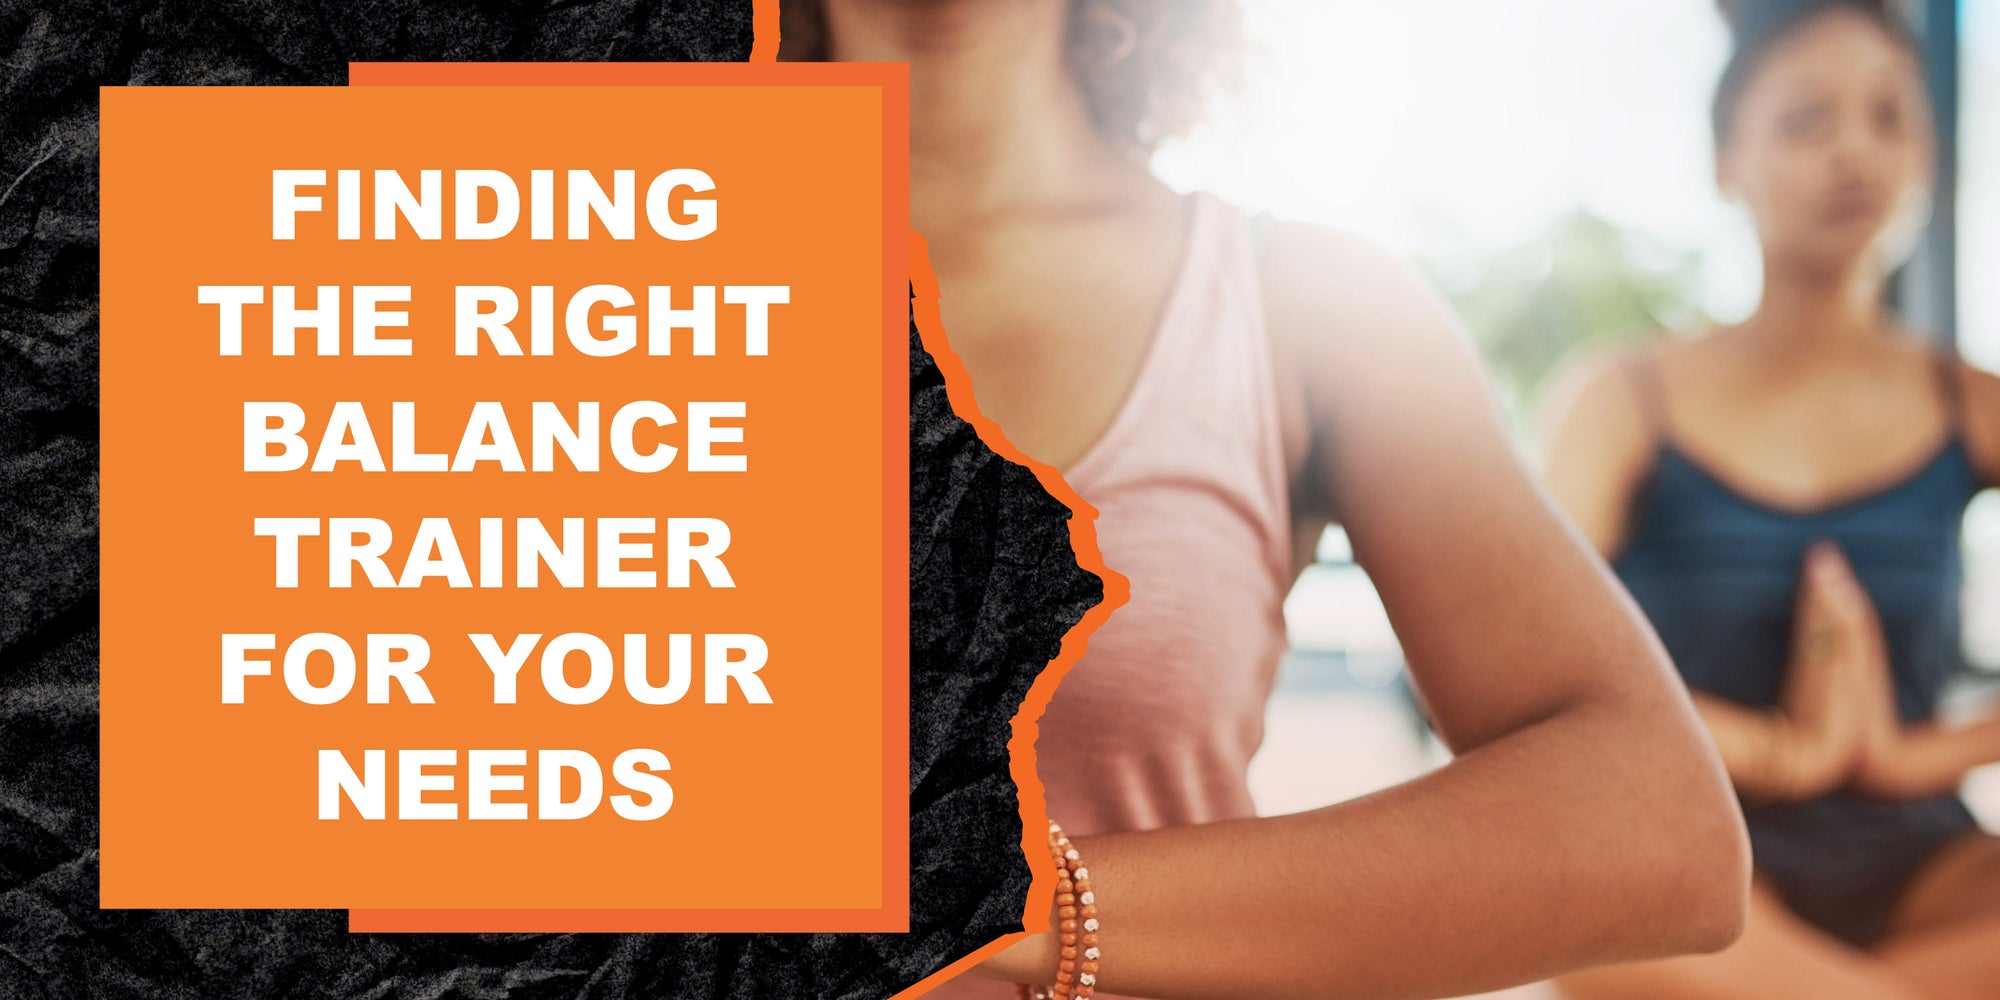 Finding the Right Balance Trainer For Your Needs